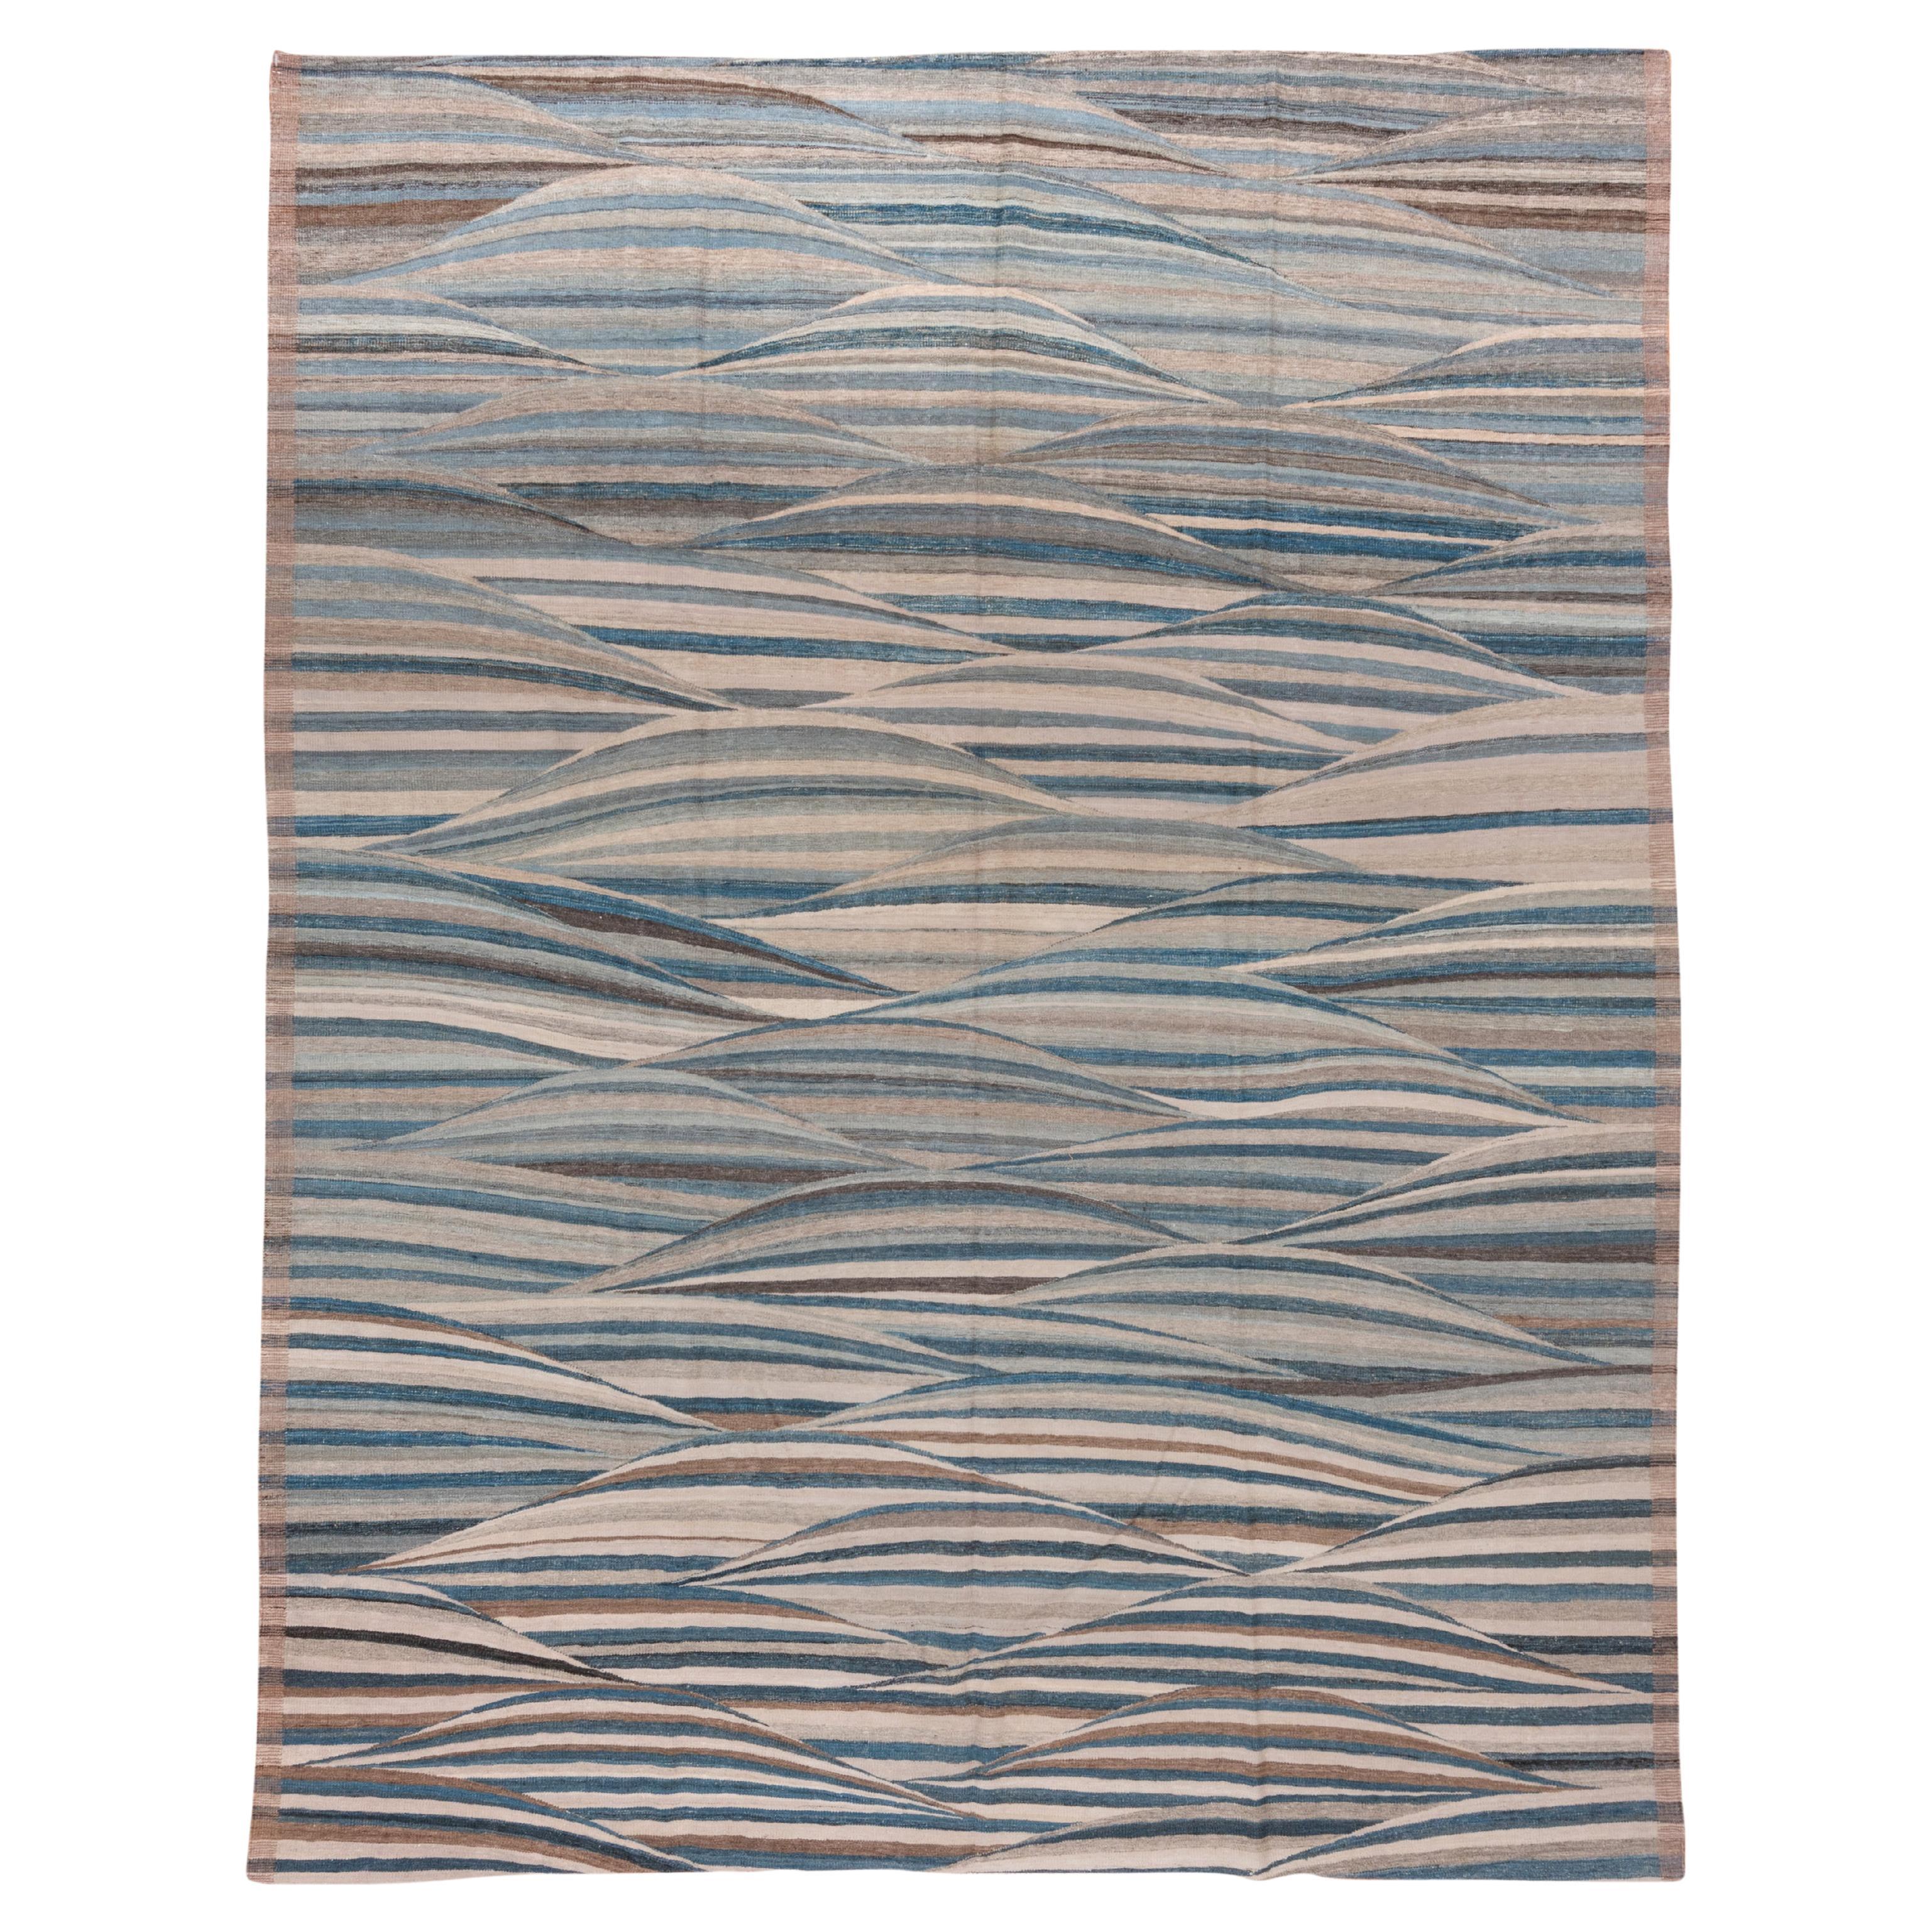 Finely Woven Modern Afghan Flatweave Rug, Taupe, Blue & Brown Palette